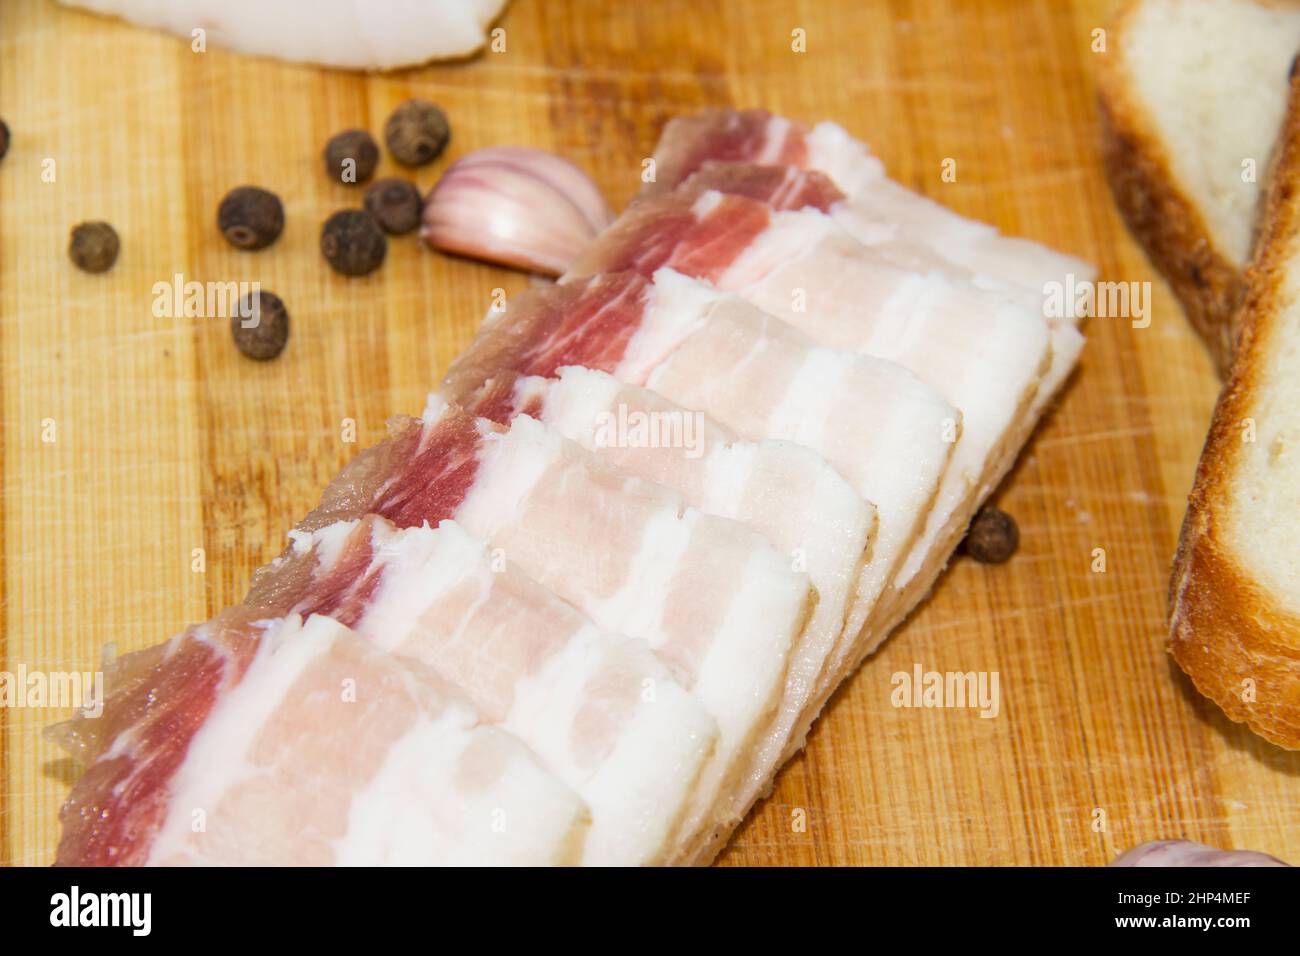 Ukrainian traditional food concept with white bread. Ukrainian raw lard with peppercorn and garlic, knife, slices of salo lying on wooden cutting boar Stock Photo